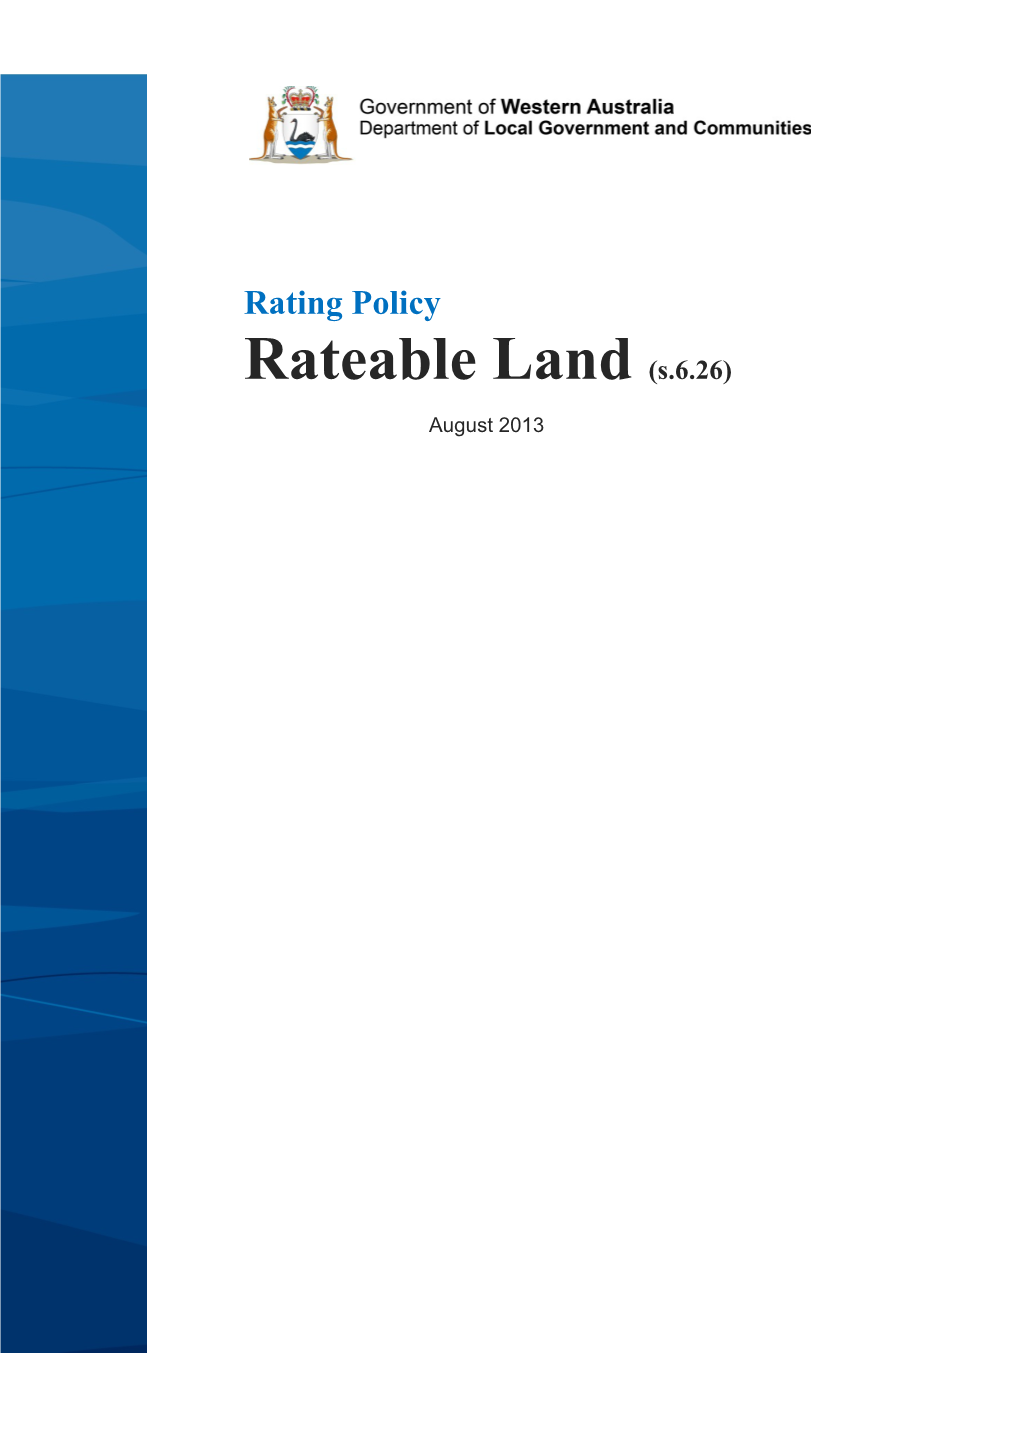 Rating Policy - Rateable Land ( August 2013 )